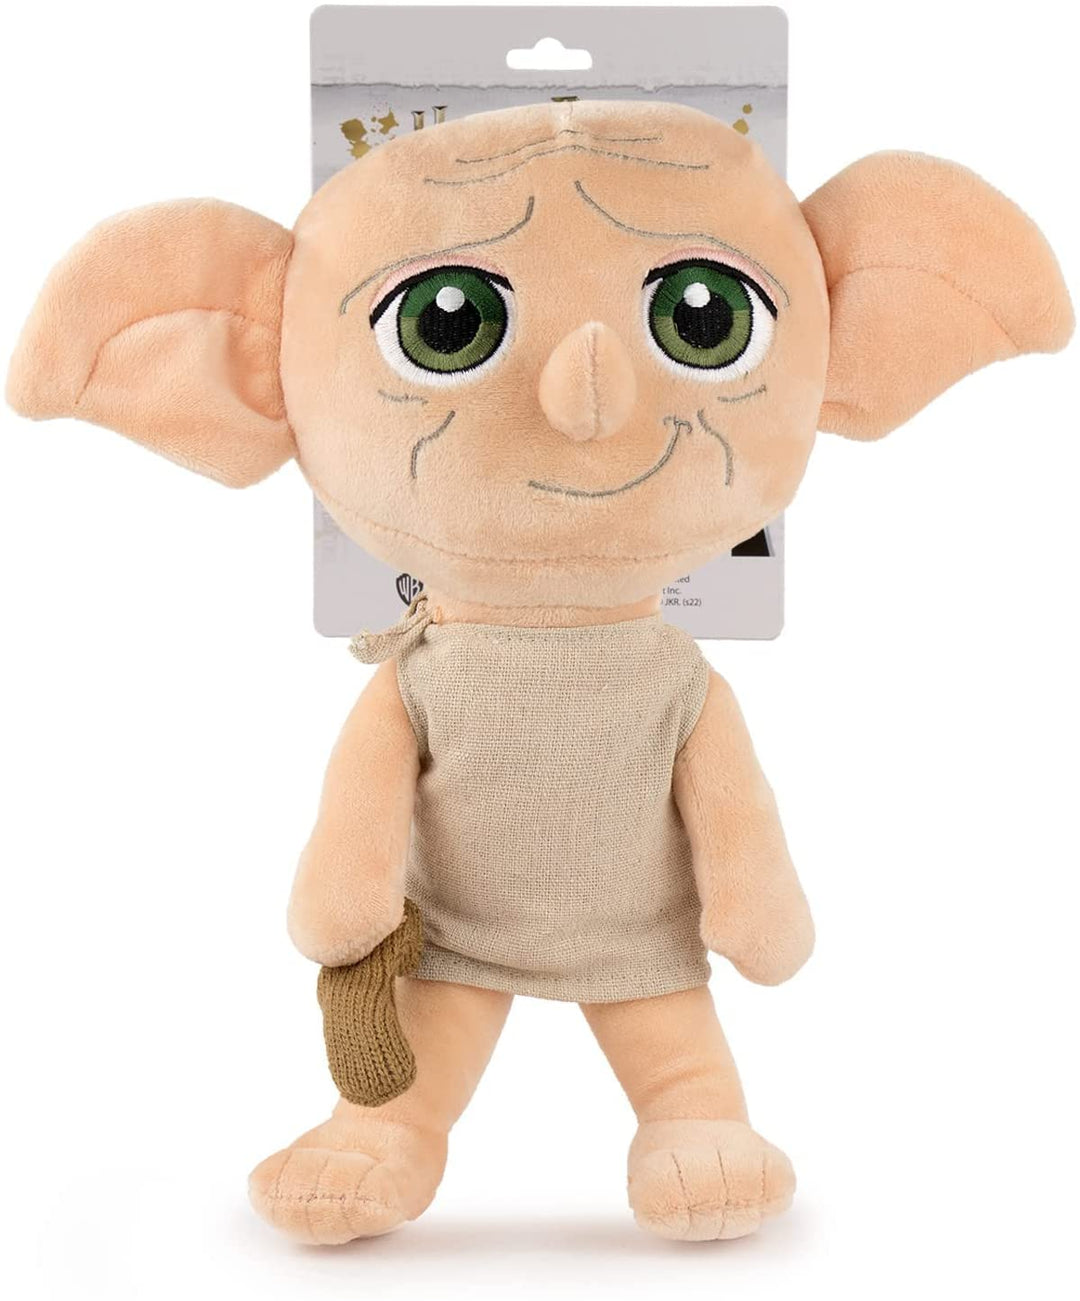 Harry Potter - Dobby character plush toy - 30cm/11'81" - Super Soft Quality